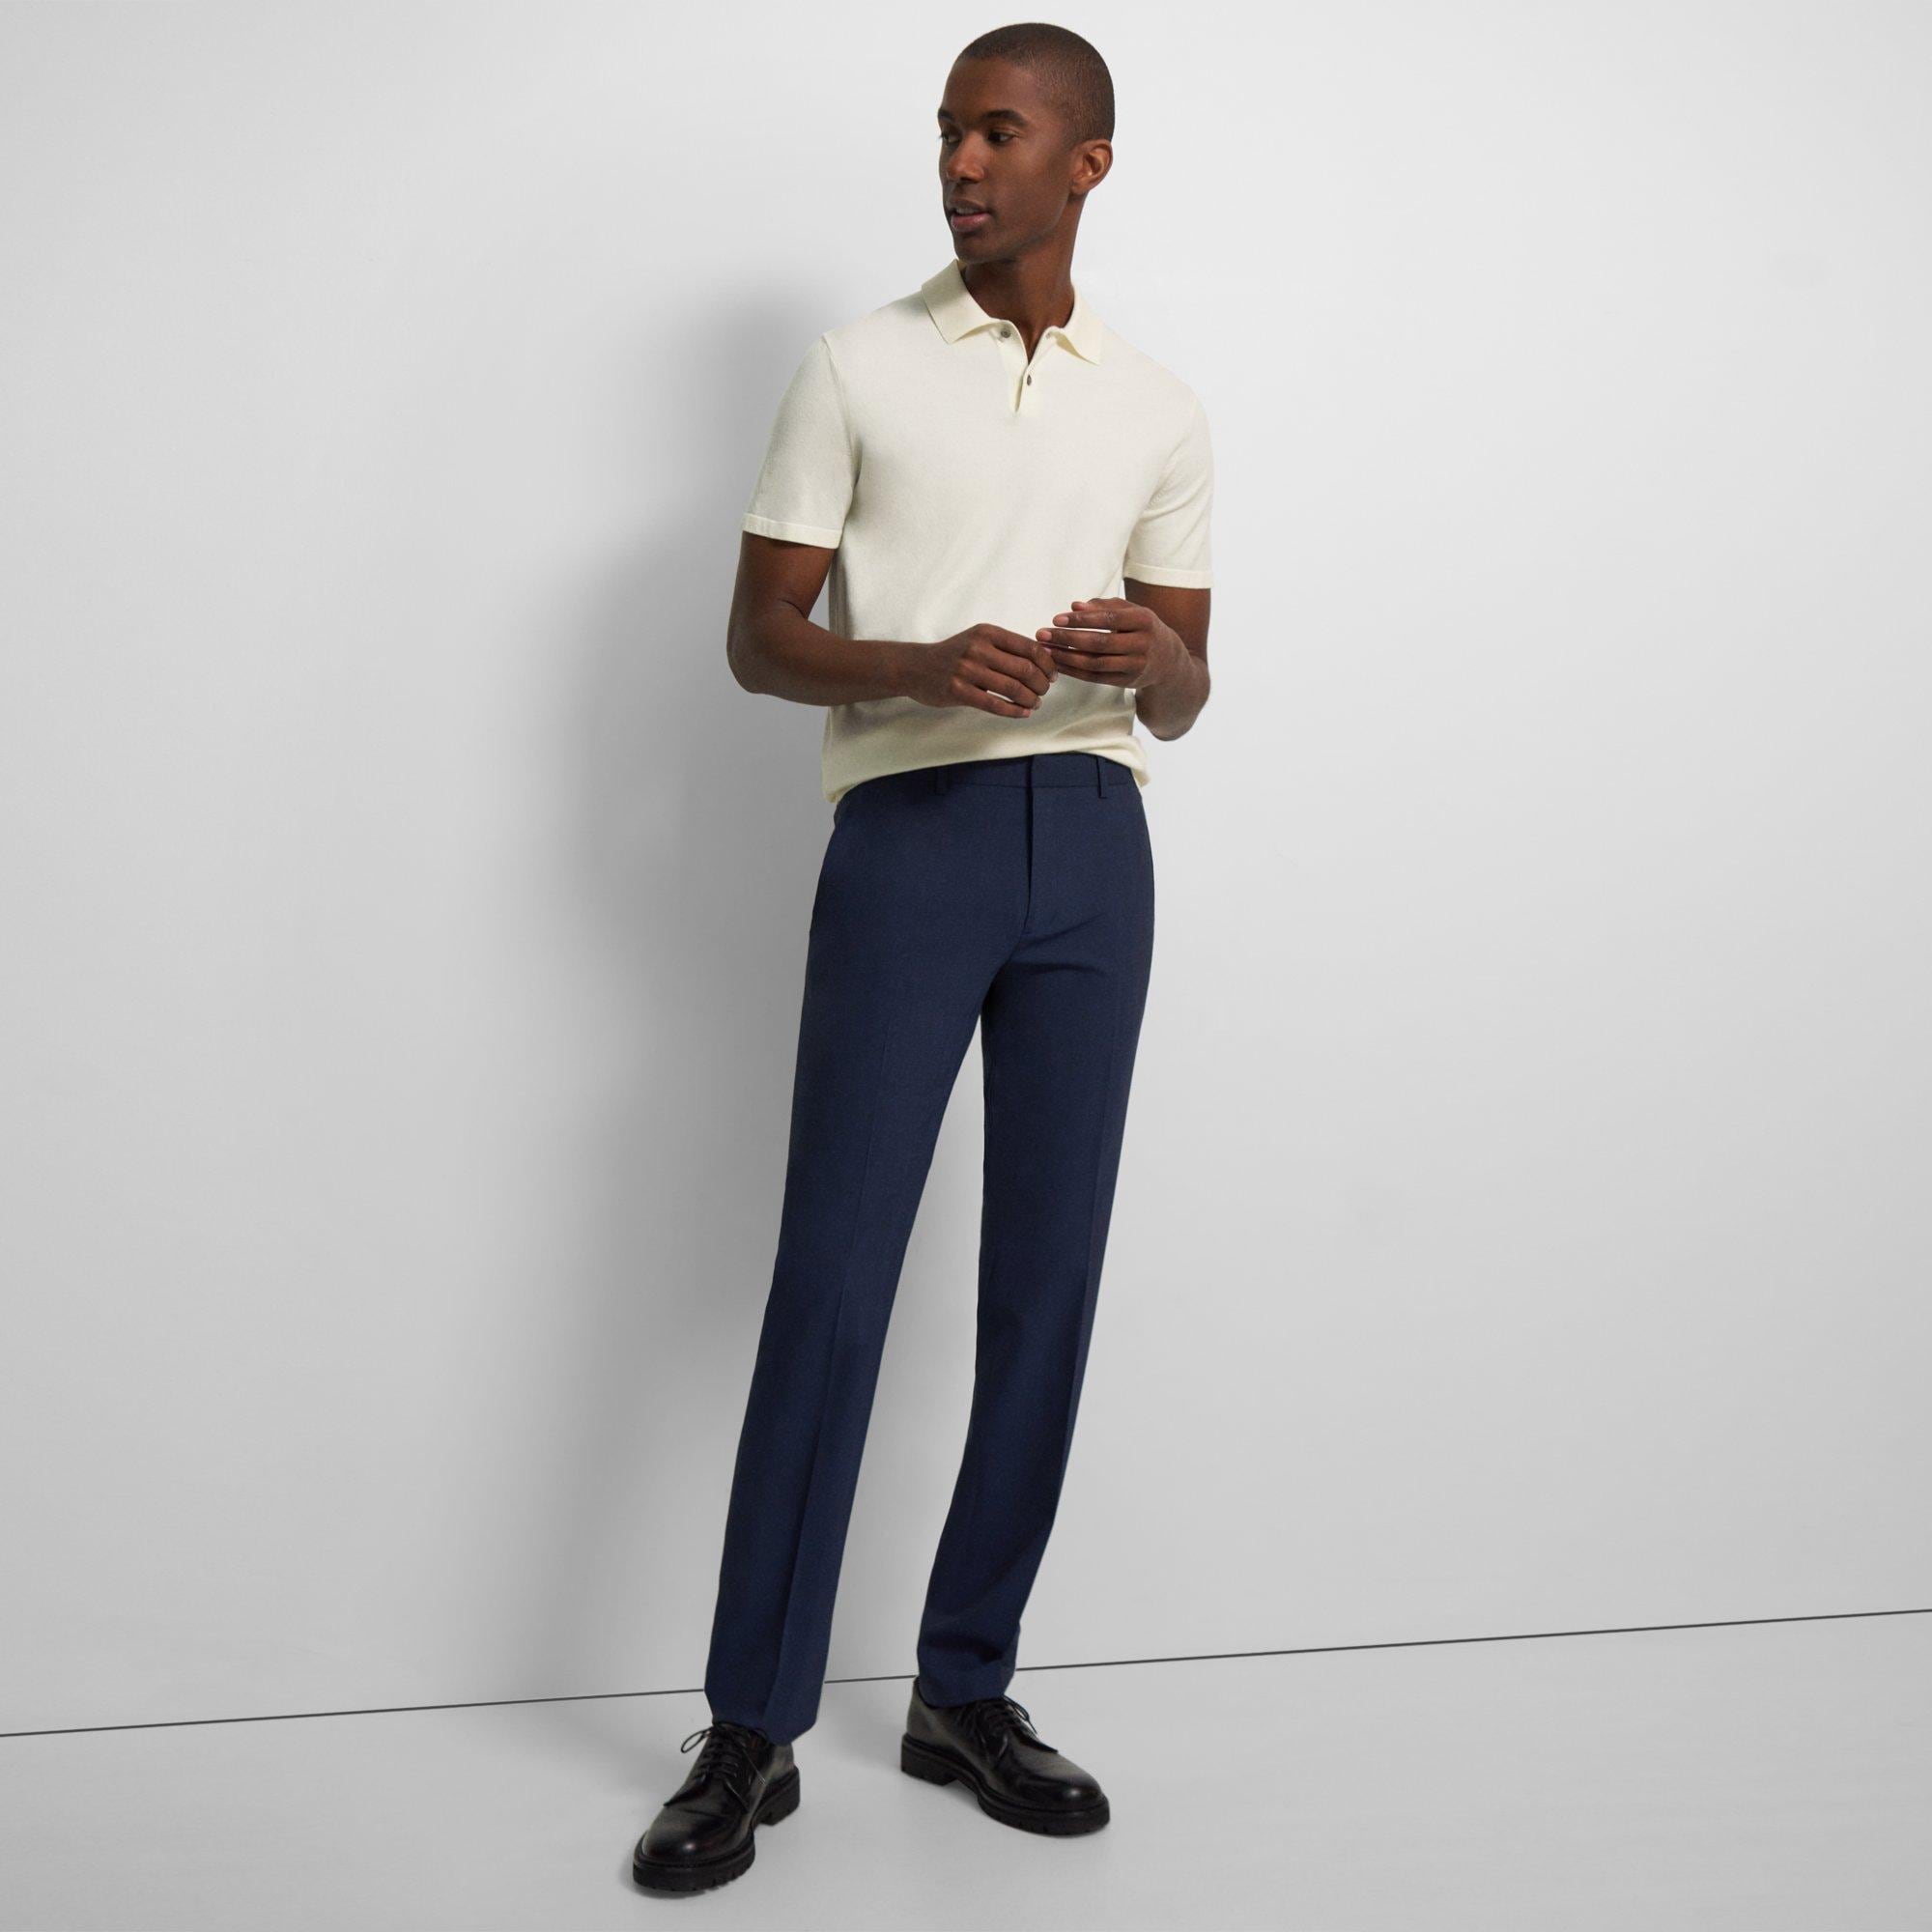 Theory Mayer Pant in Stretch Wool